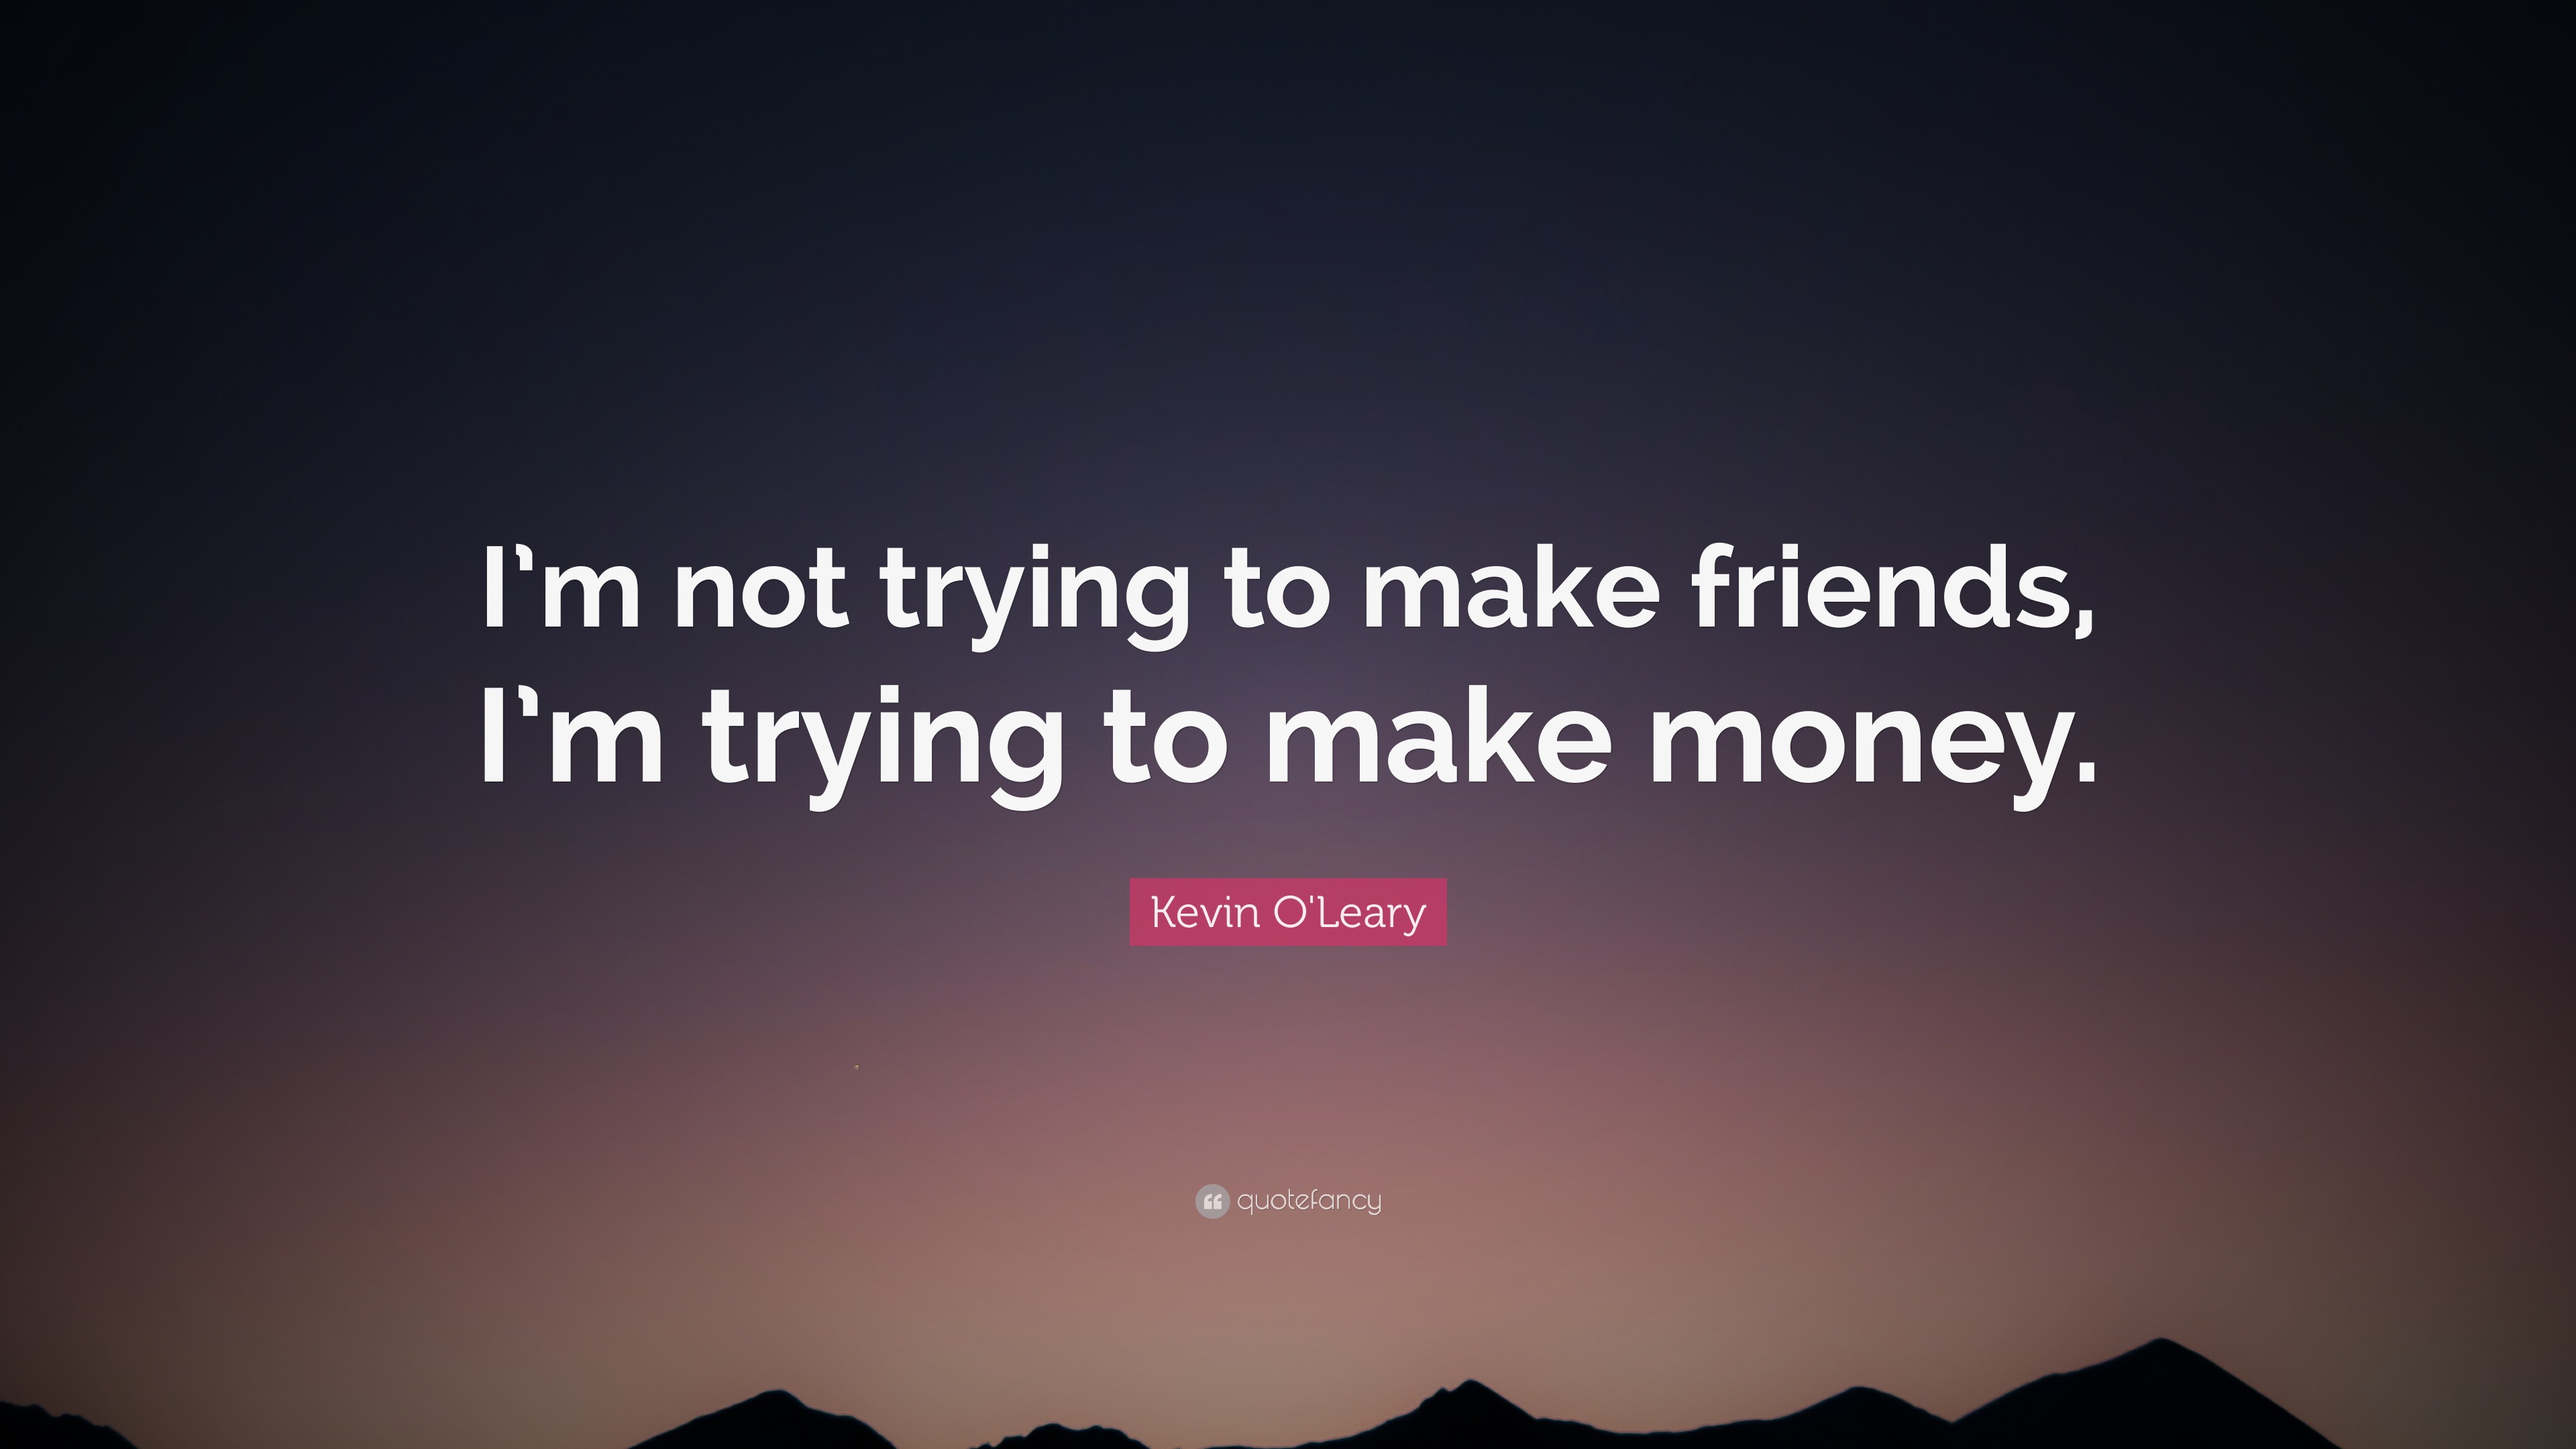 Kevin O'Leary Quote: "I'm not trying to make friends, I'm ...